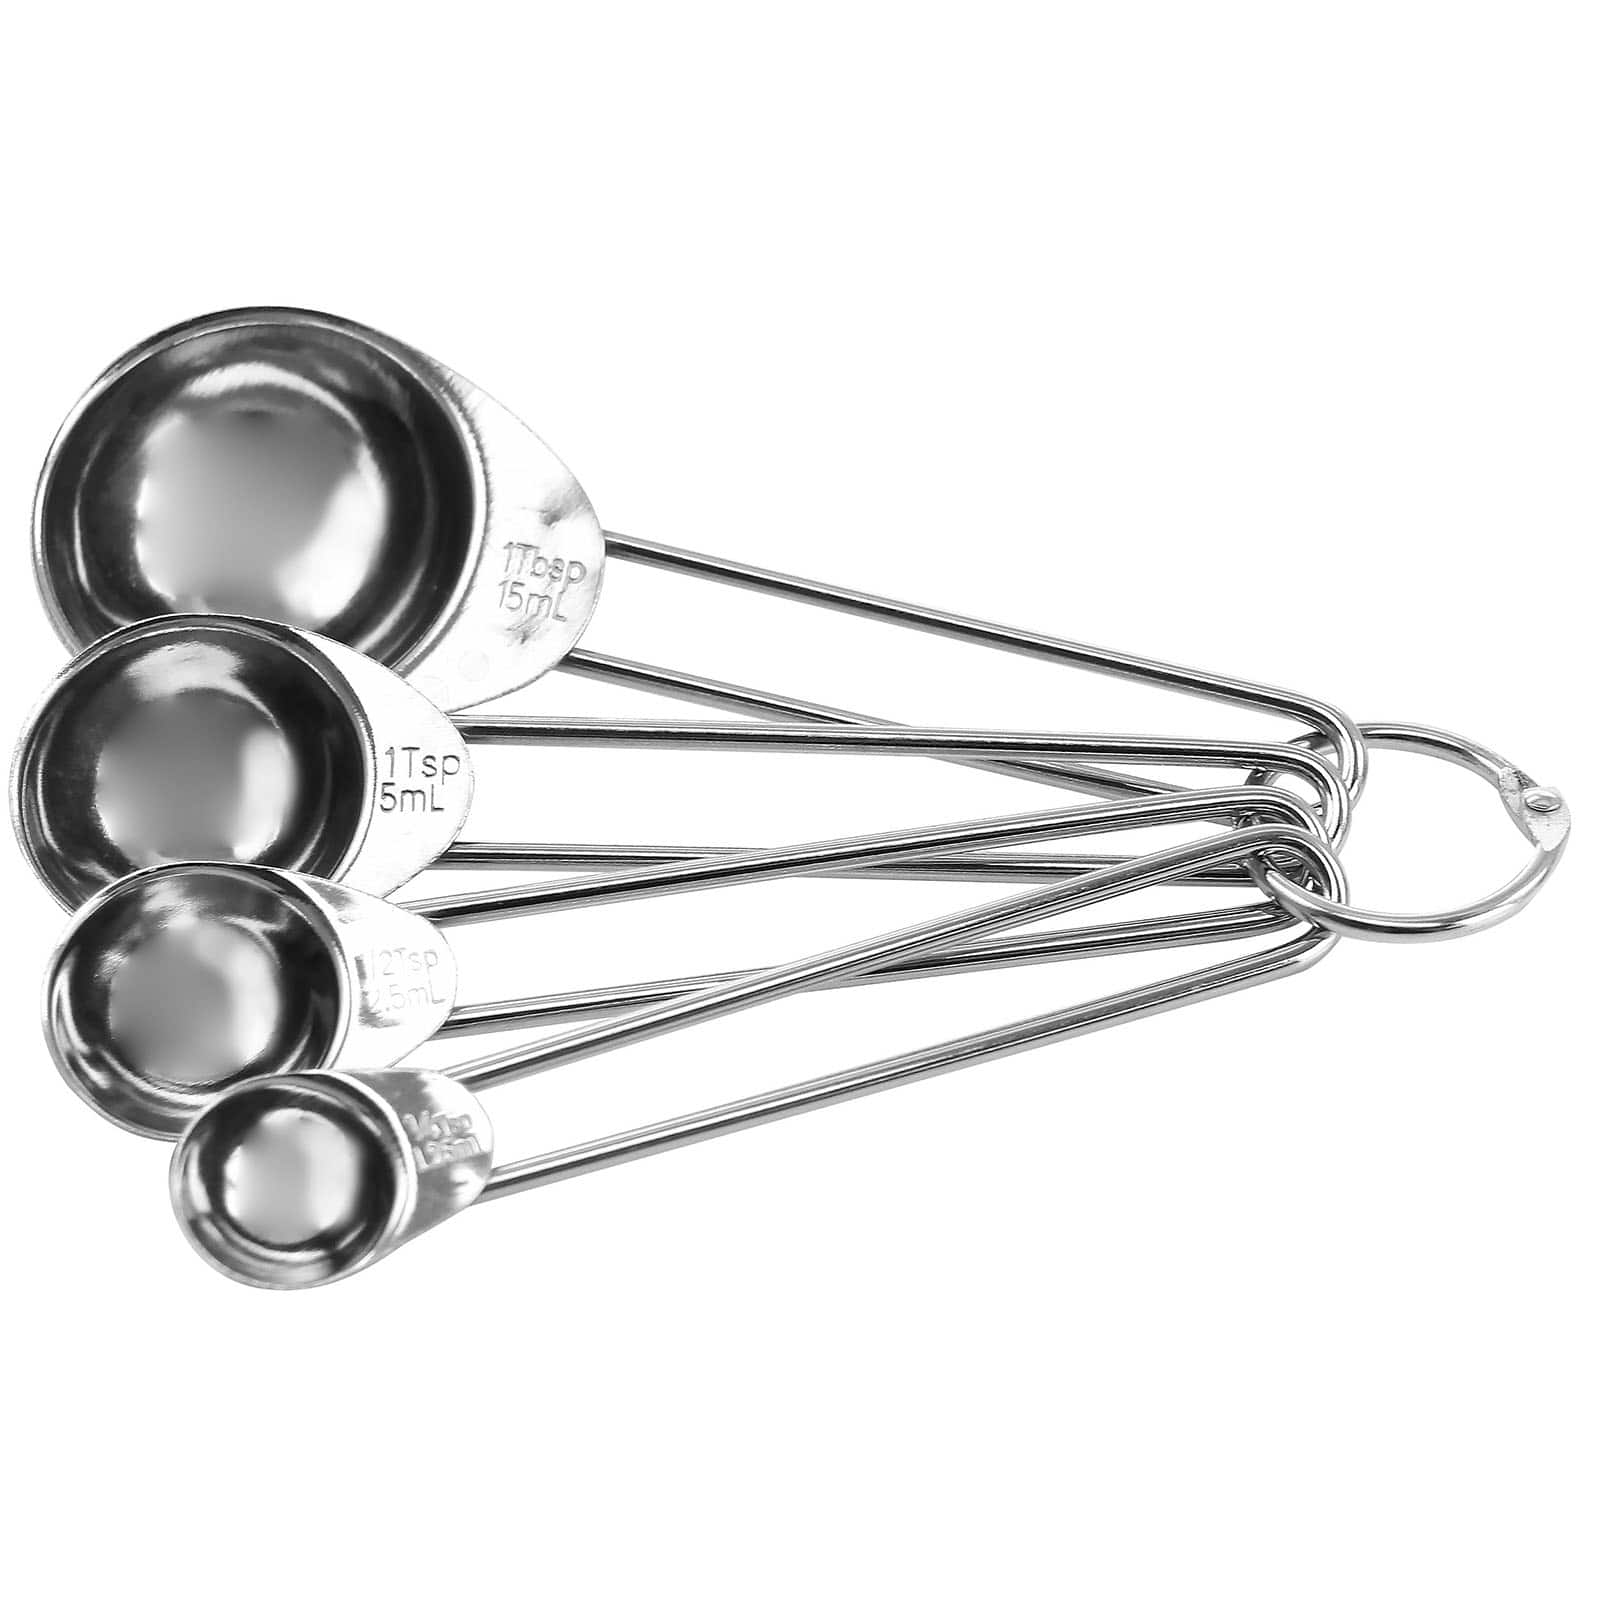 Stainless Steel Measuring Cups and Spoons Set (14 Piece Set